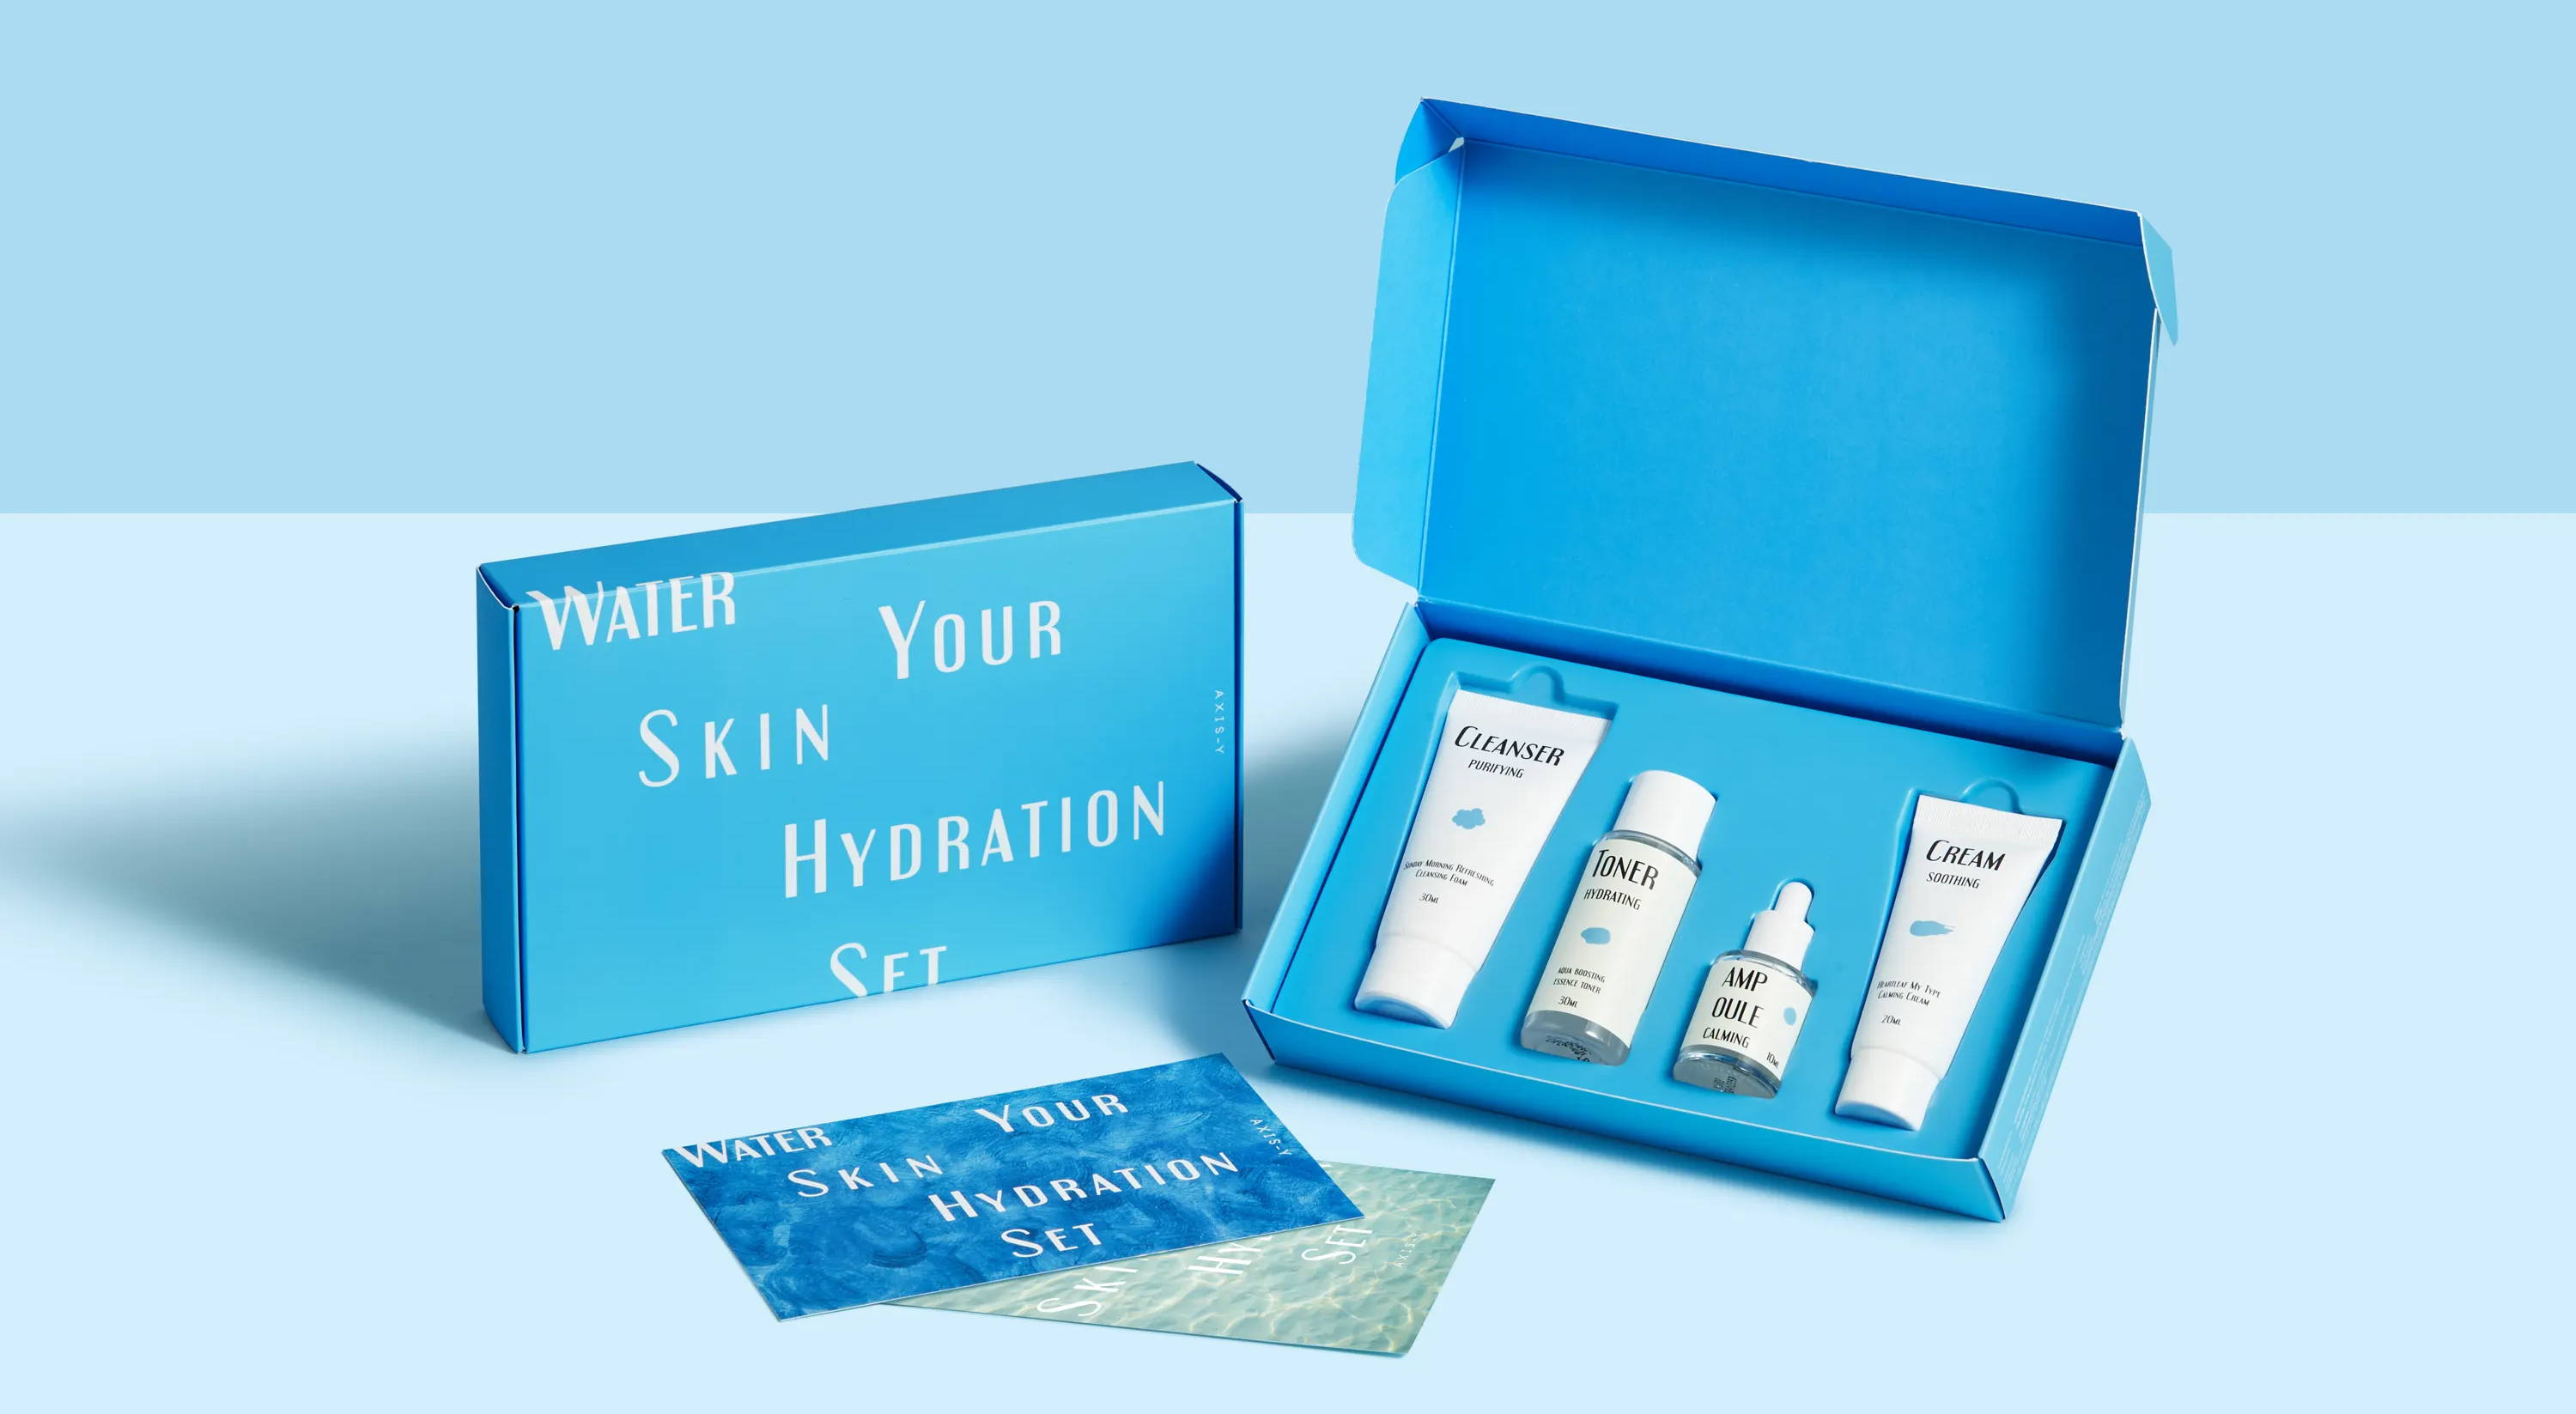 Water Your Skin ultra Hydration Set Box opened, with four products inside